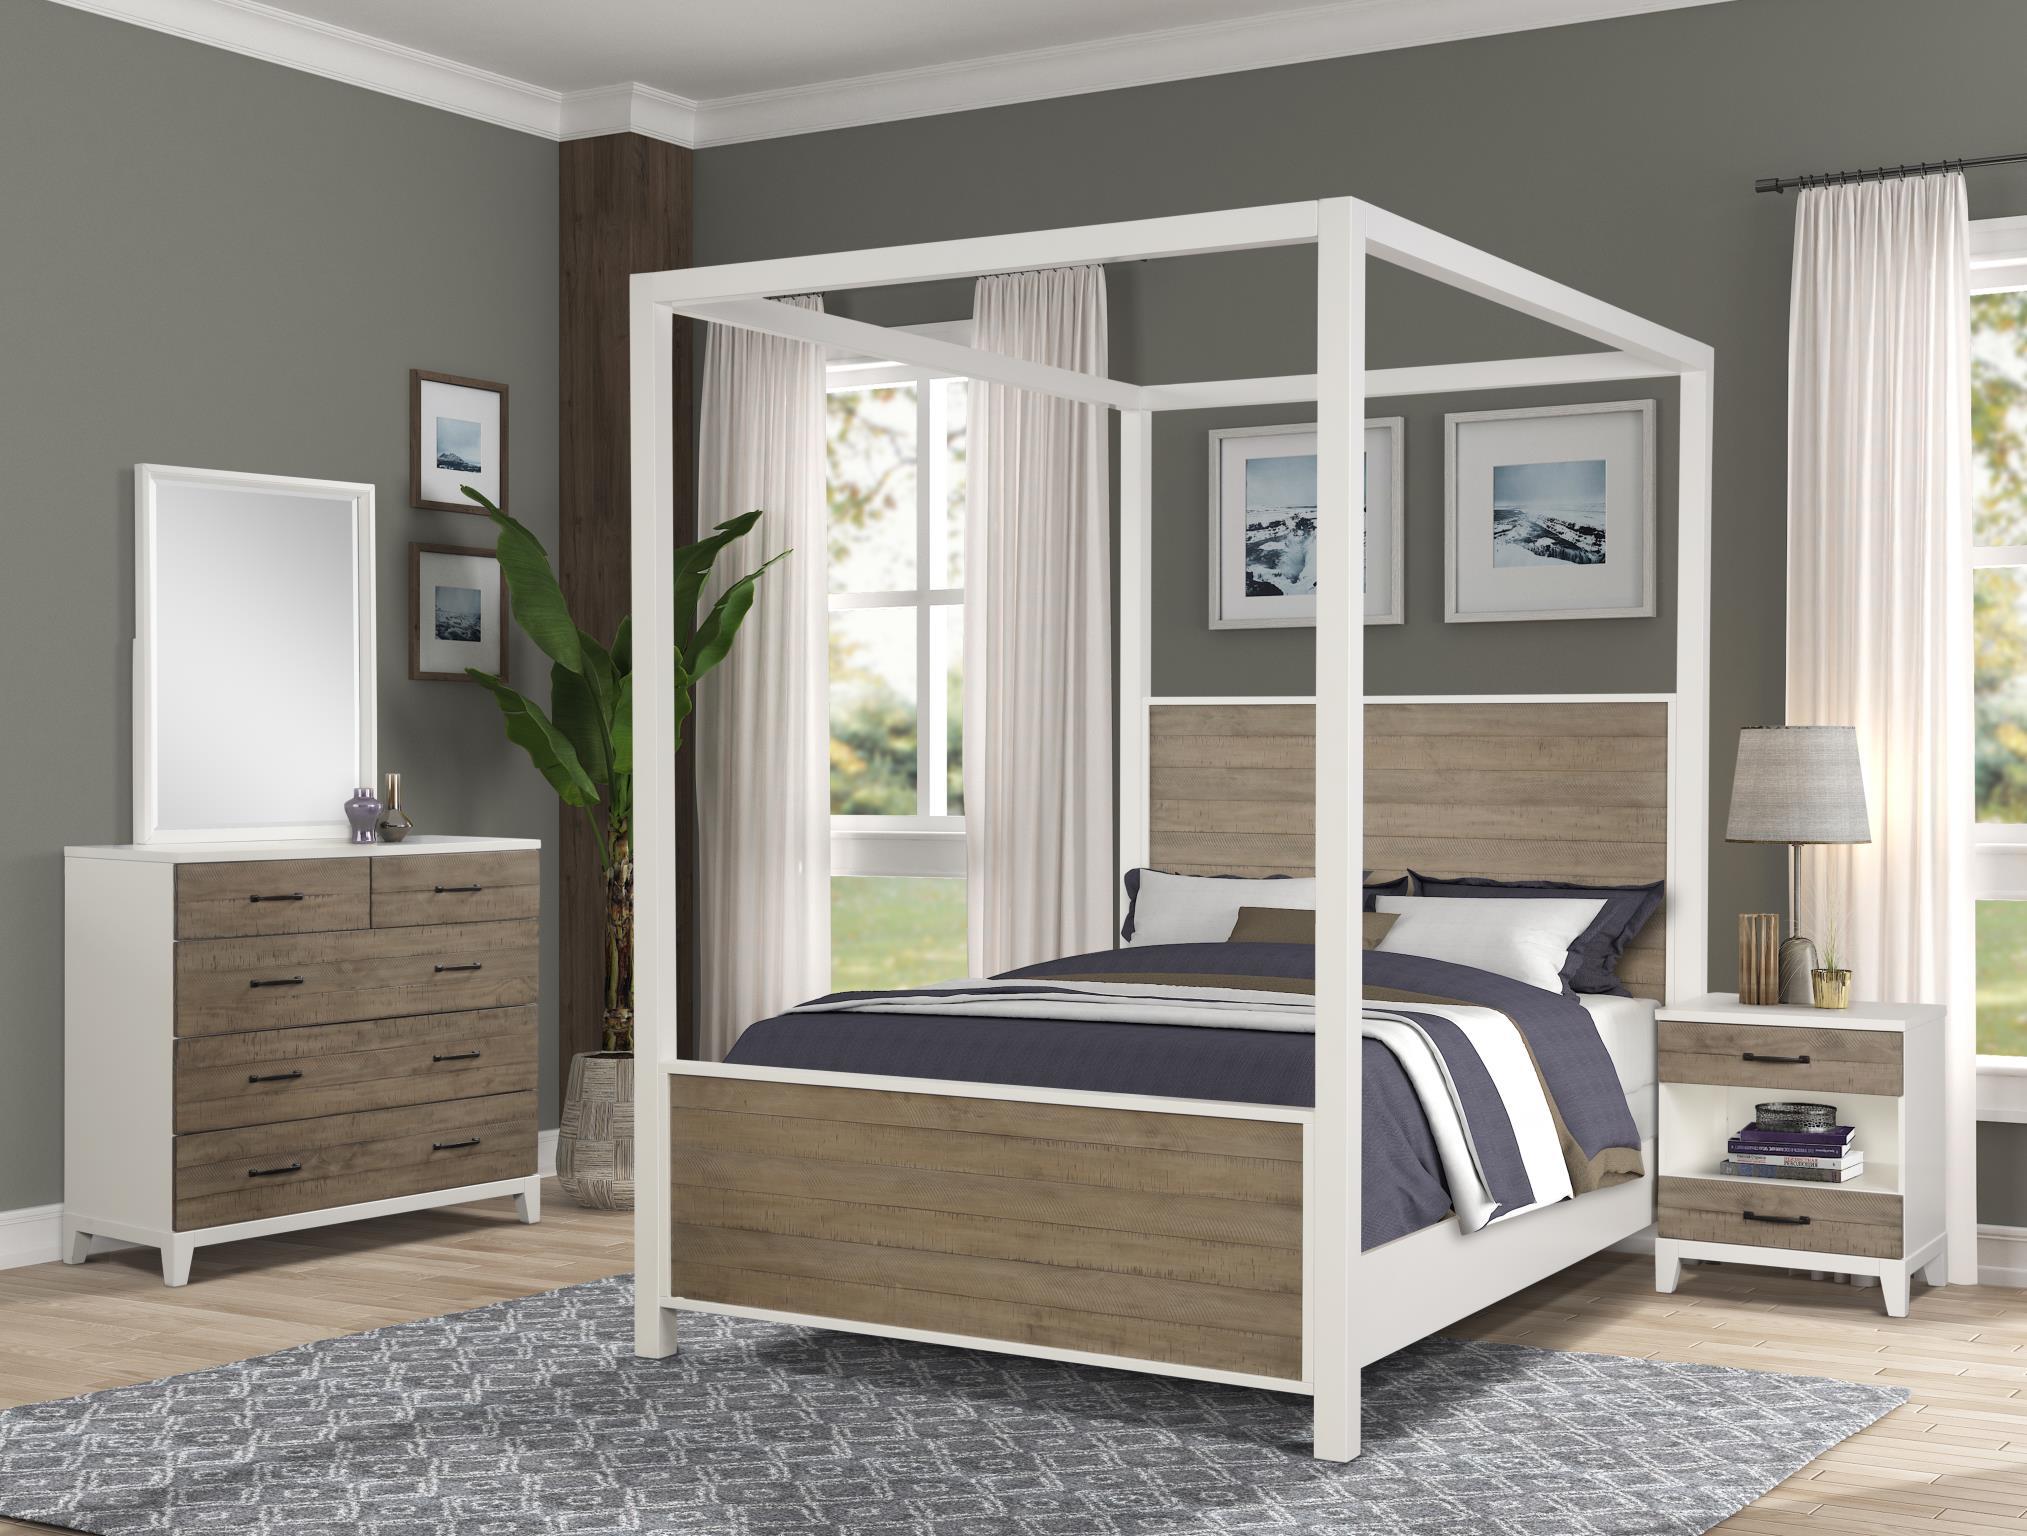 Contemporary, Transitional Bedroom Set DAYDREAMS 1288-108-Set-3 1288-108-2N-3PC in Brown Oak 